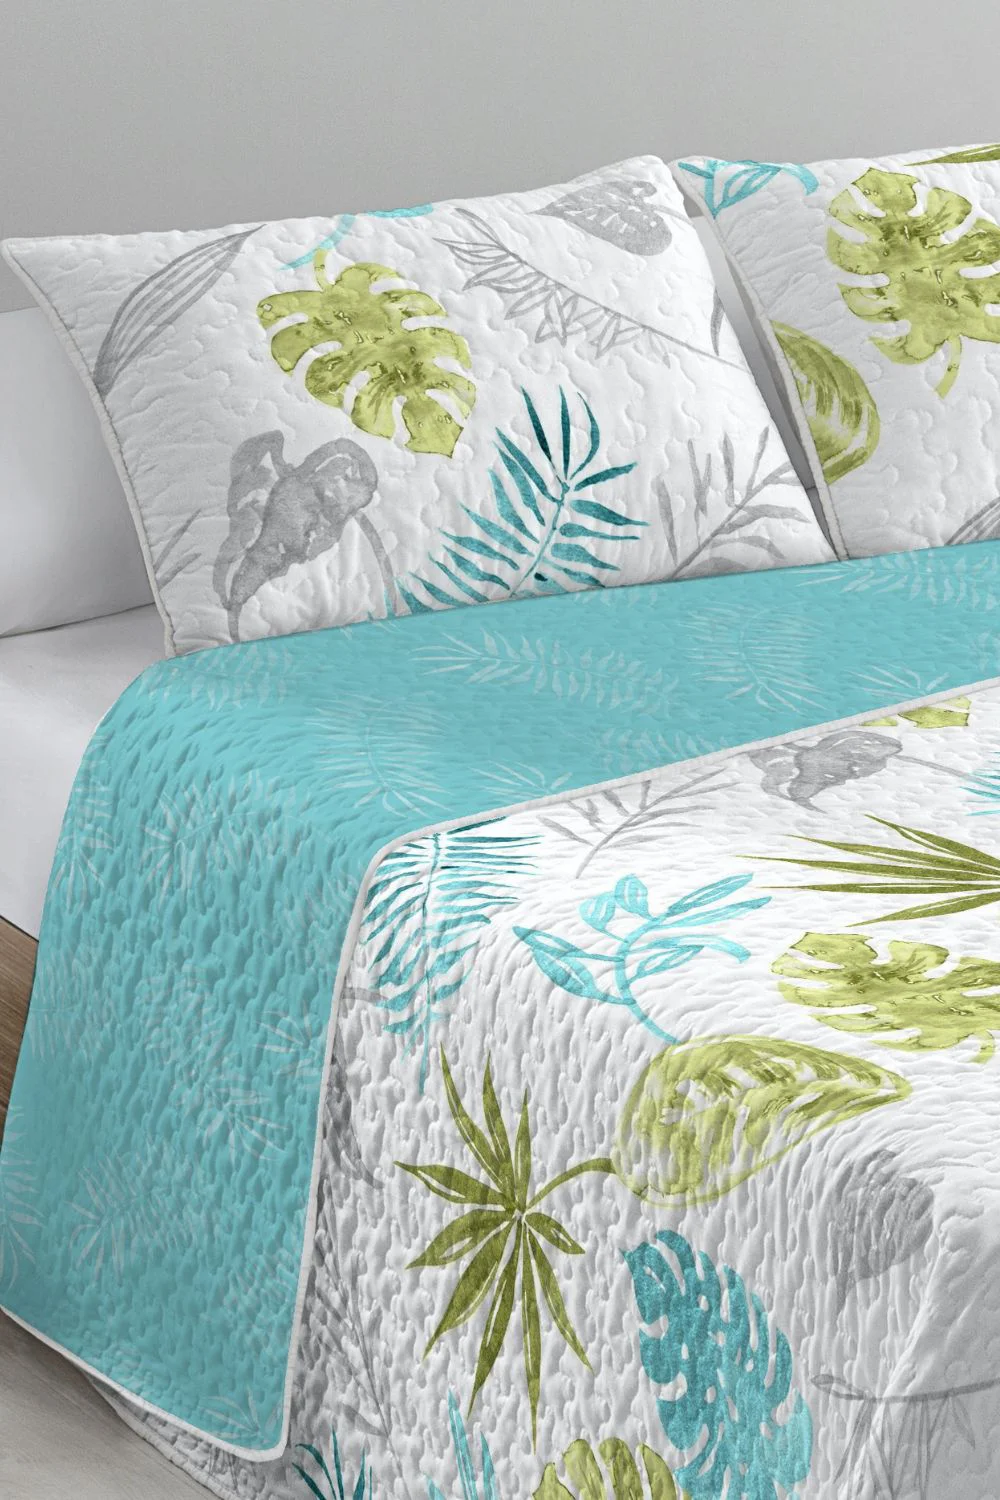 CUTE BOUTI BEDSPREAD - TURQUOISE